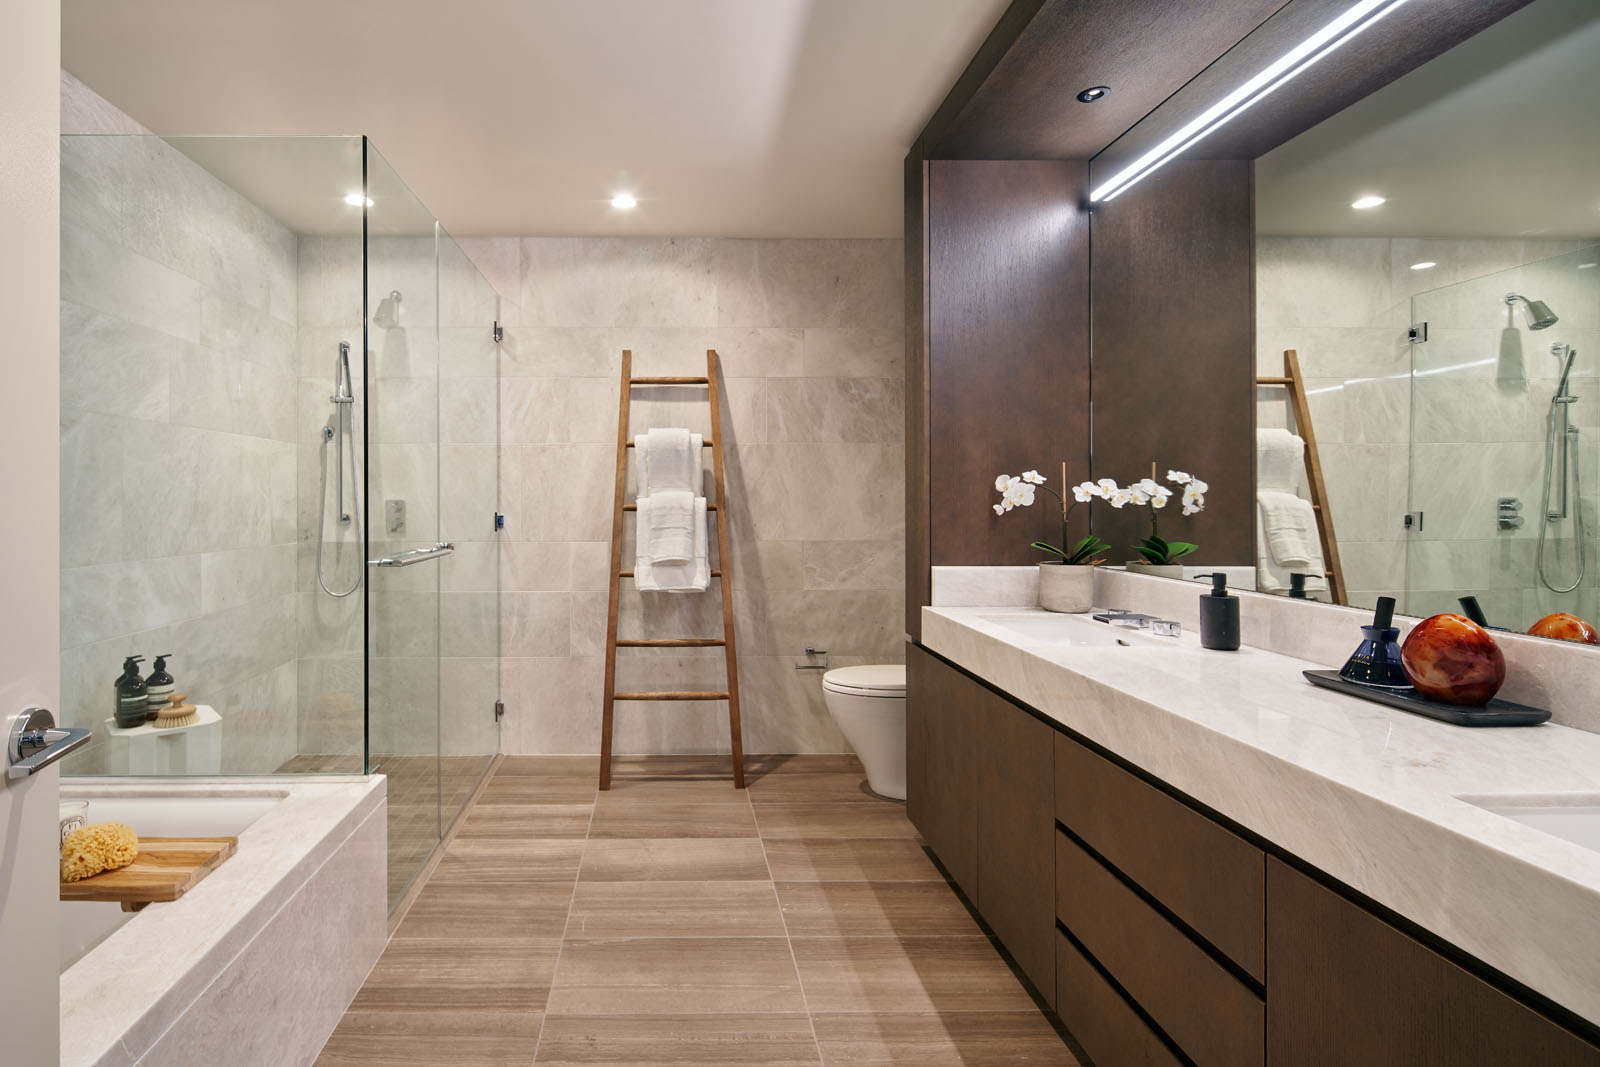 Master bathroom at The Avery condos in San Francisco. White marble double vanity with mirror, a soaking tub and full shower.